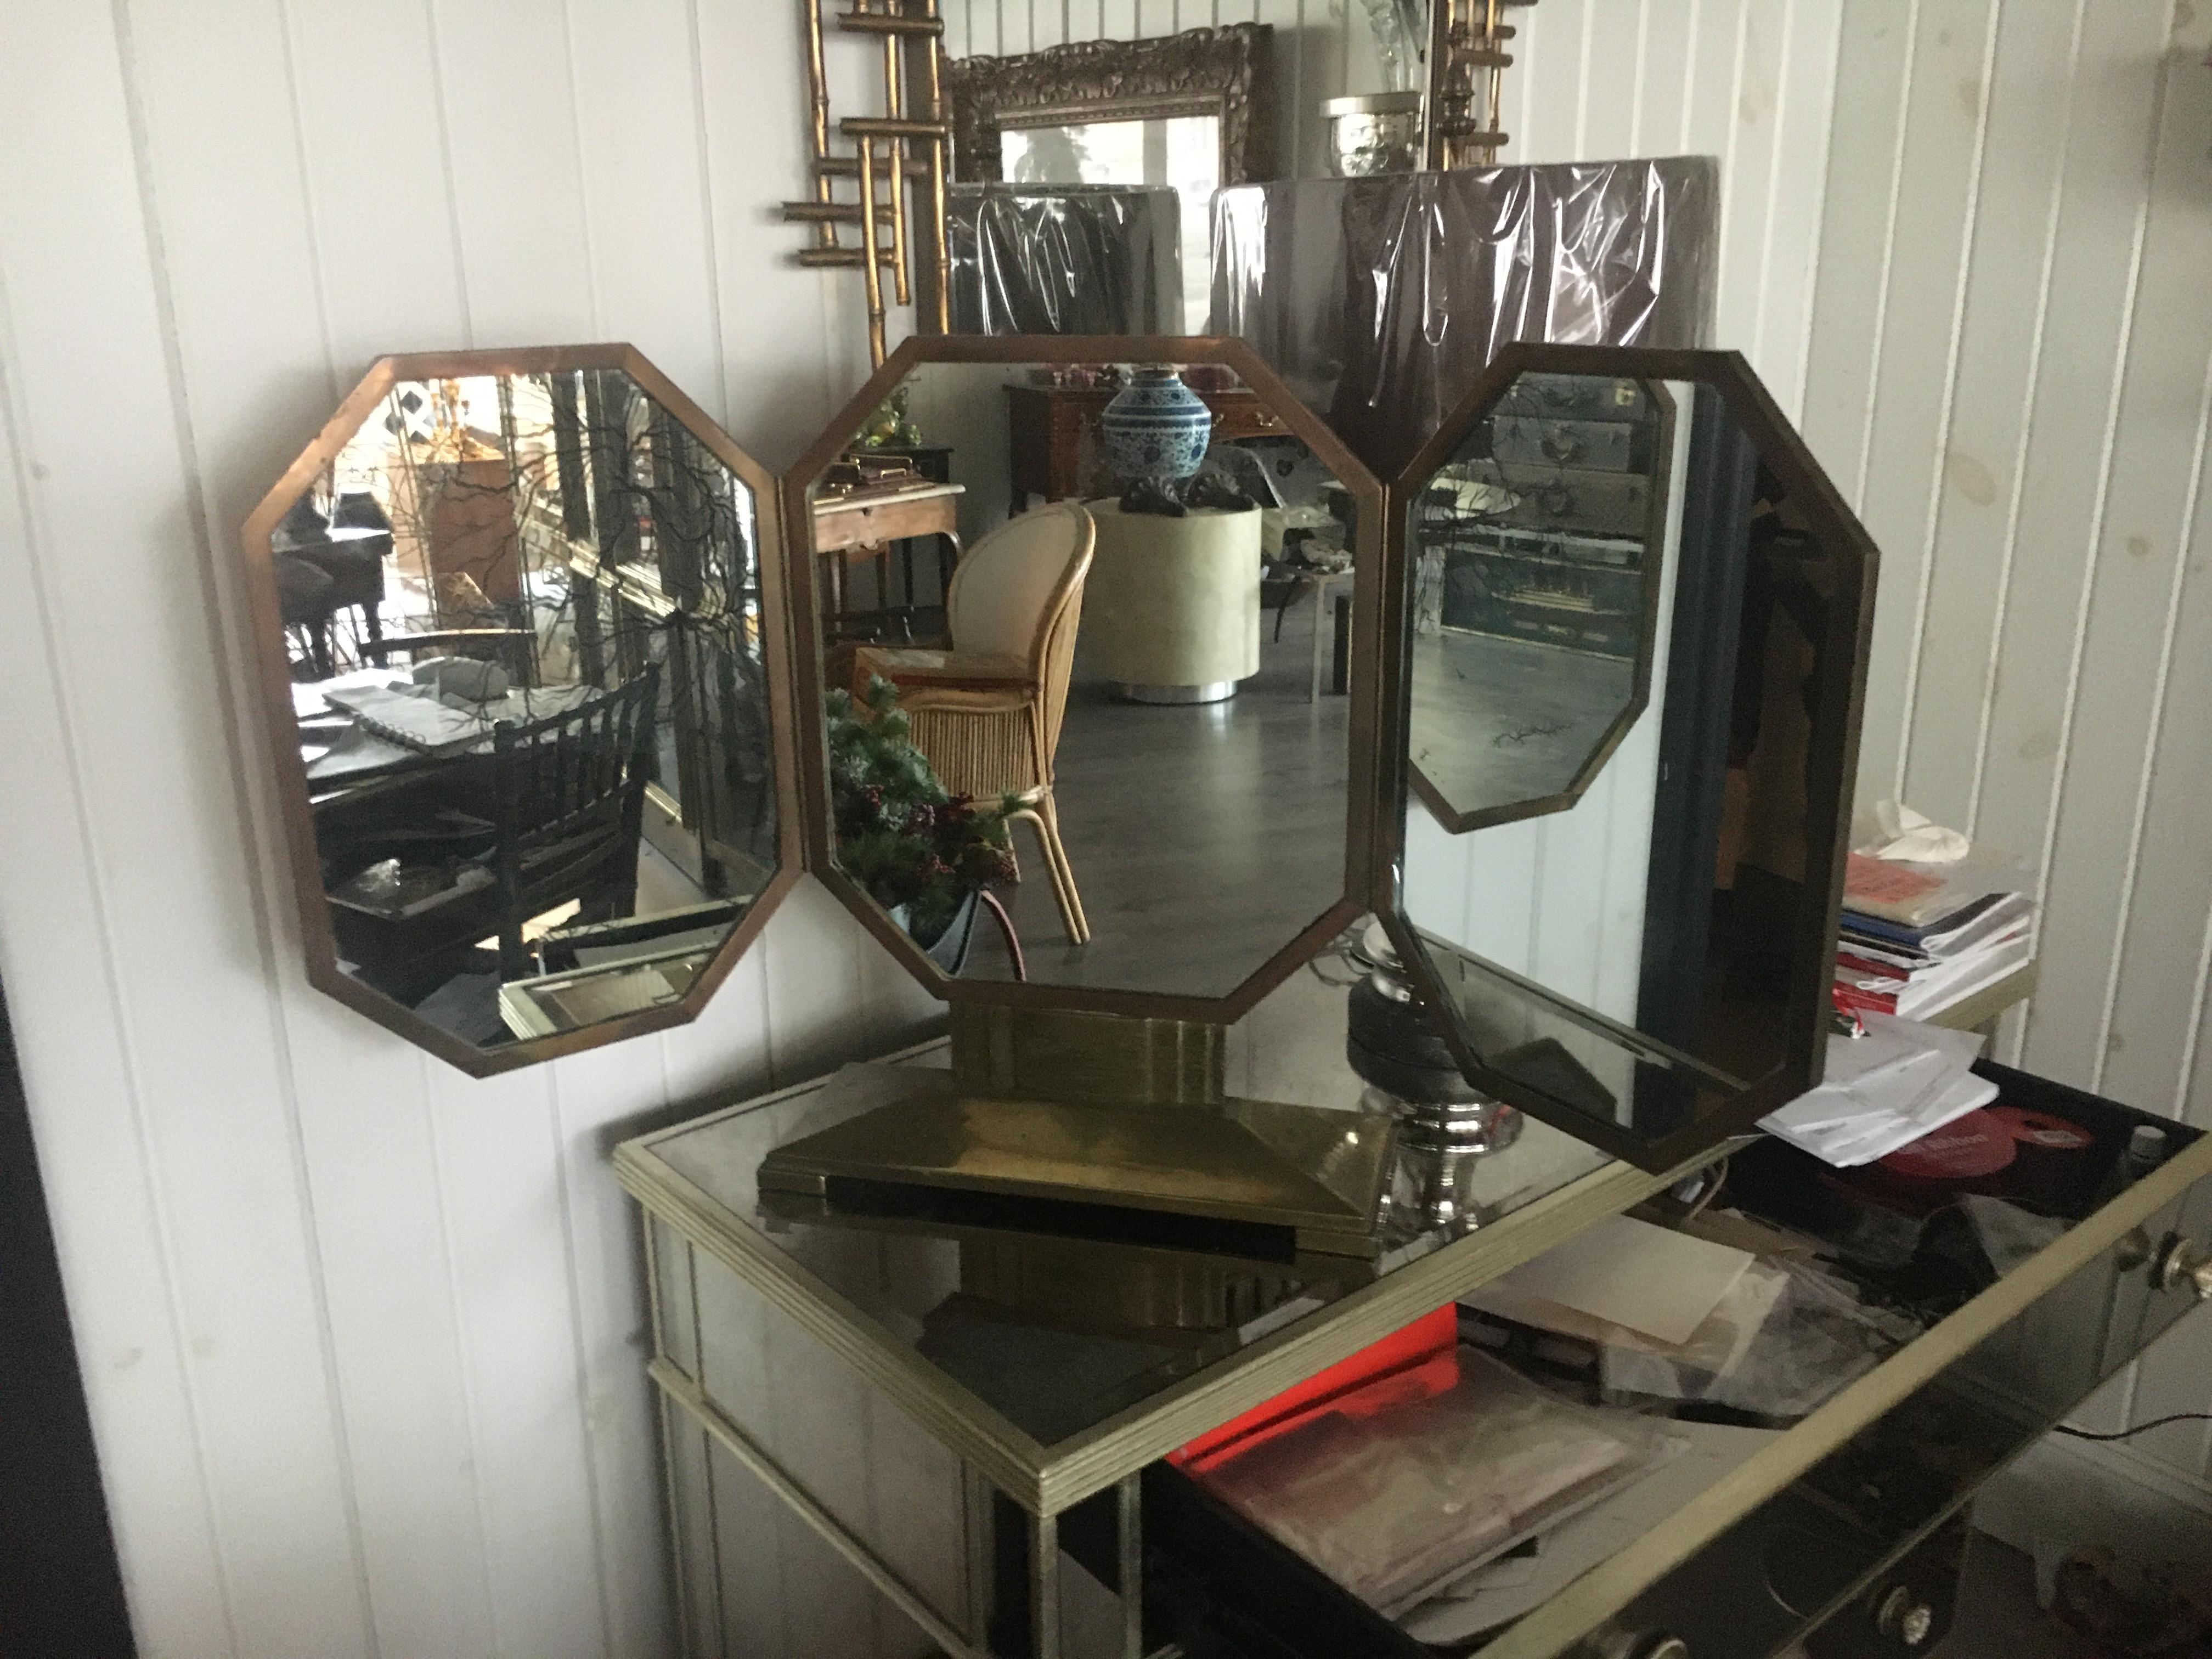 A Very Chic French Art Deco Bronze Vanity Mirror.  Original Mirrors Which Could Be Replaced, Great Scale, Patina.
Fully open: 21.5